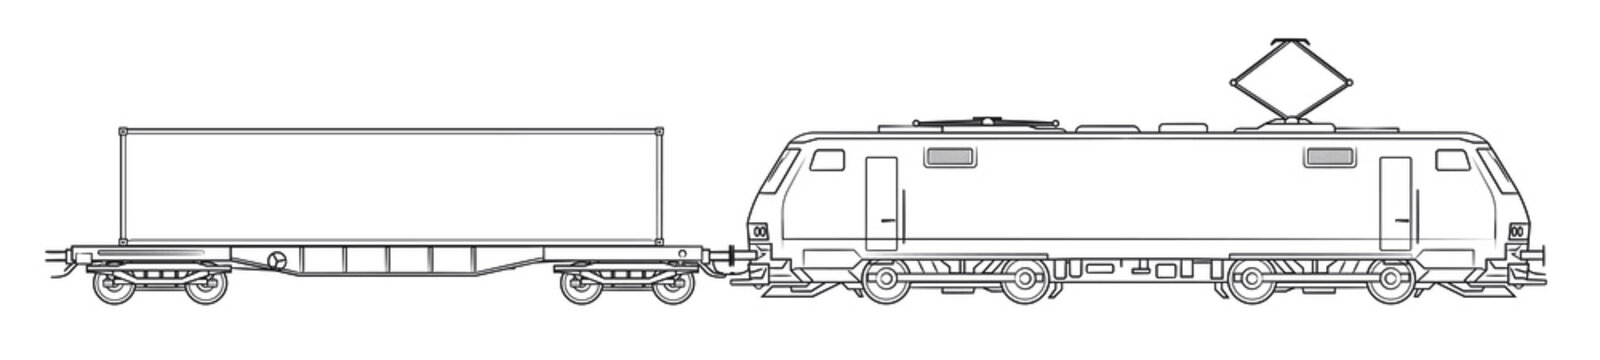 Modern cargo train with containers - outline vector stock illustration.